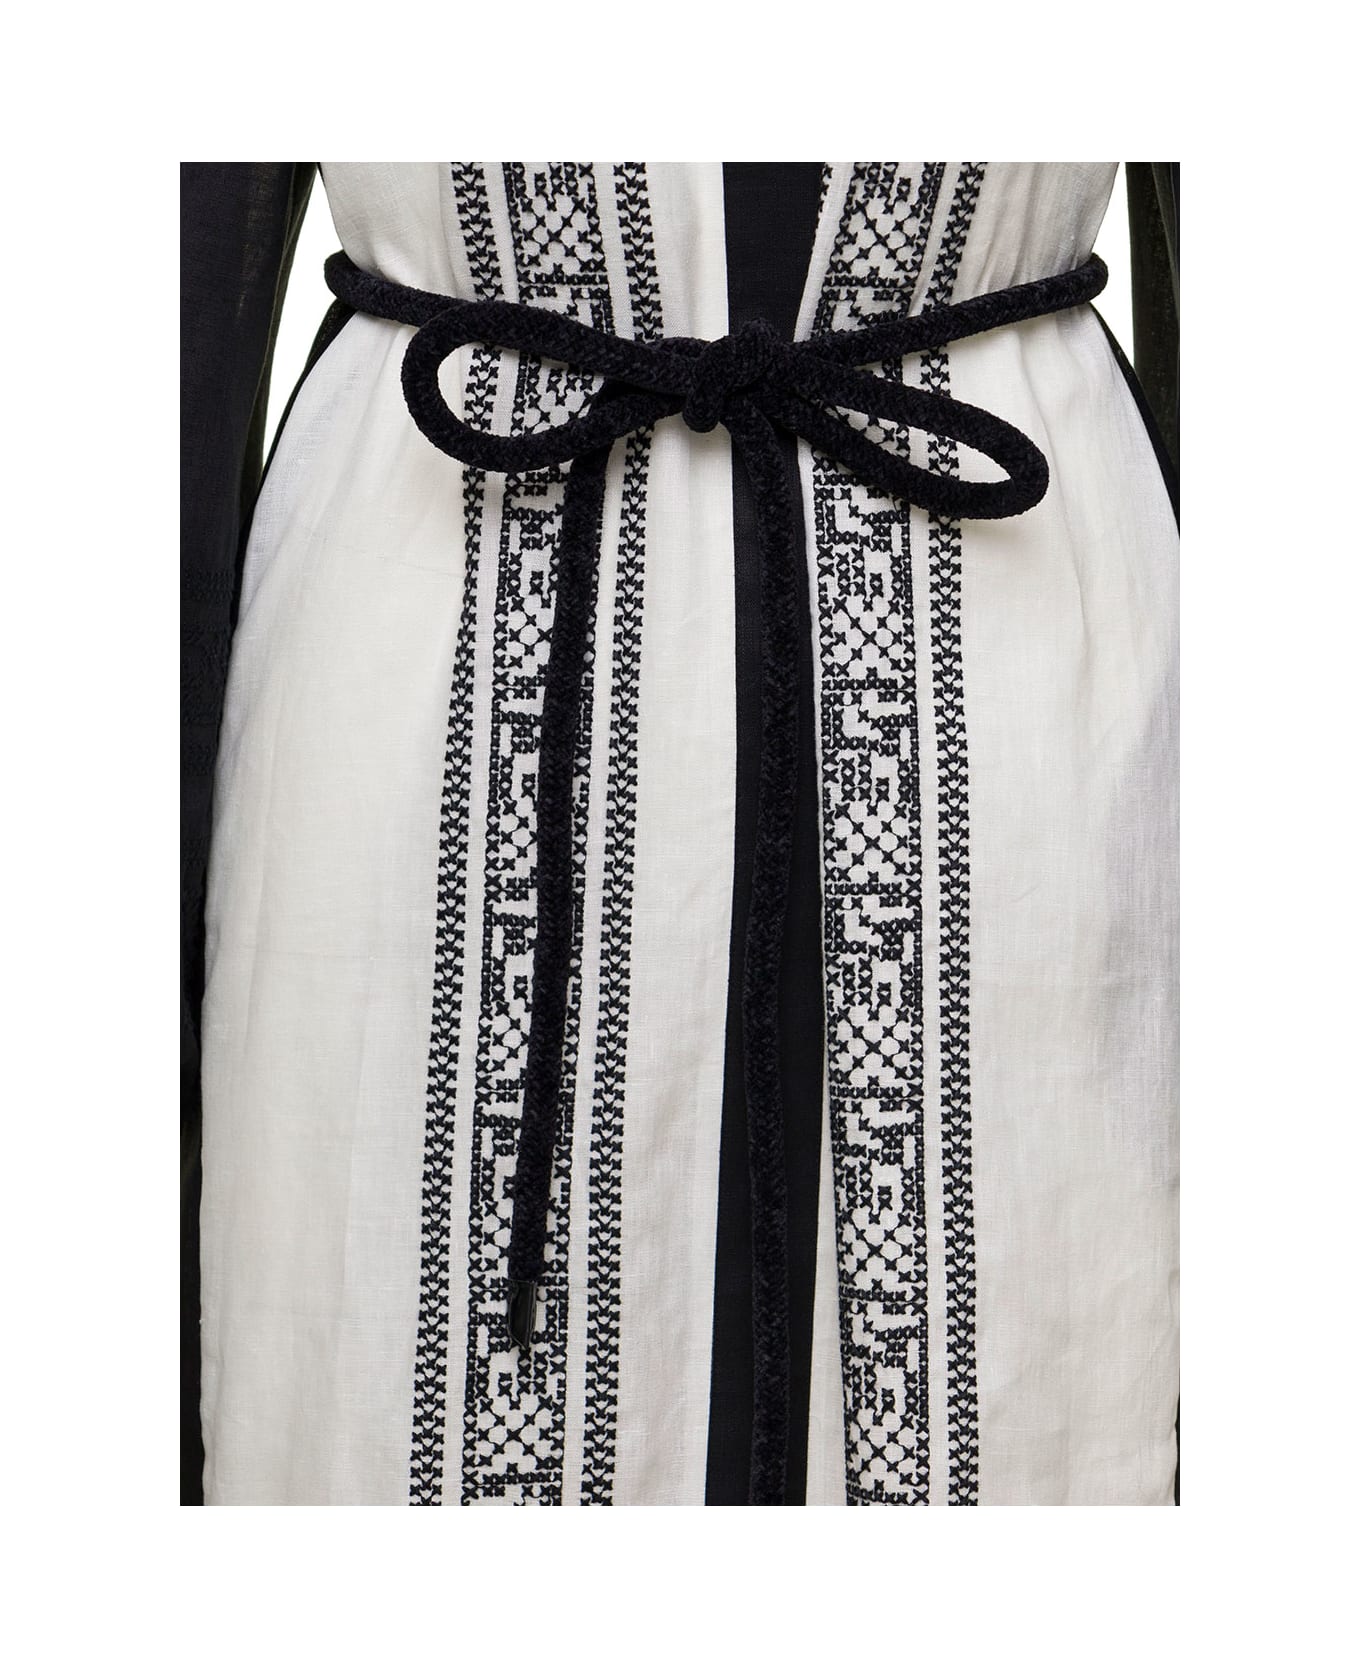 Tory Burch Black And White Embroidered Caftan With Tie And Tassels In Linen Woman Tory Burch - Black